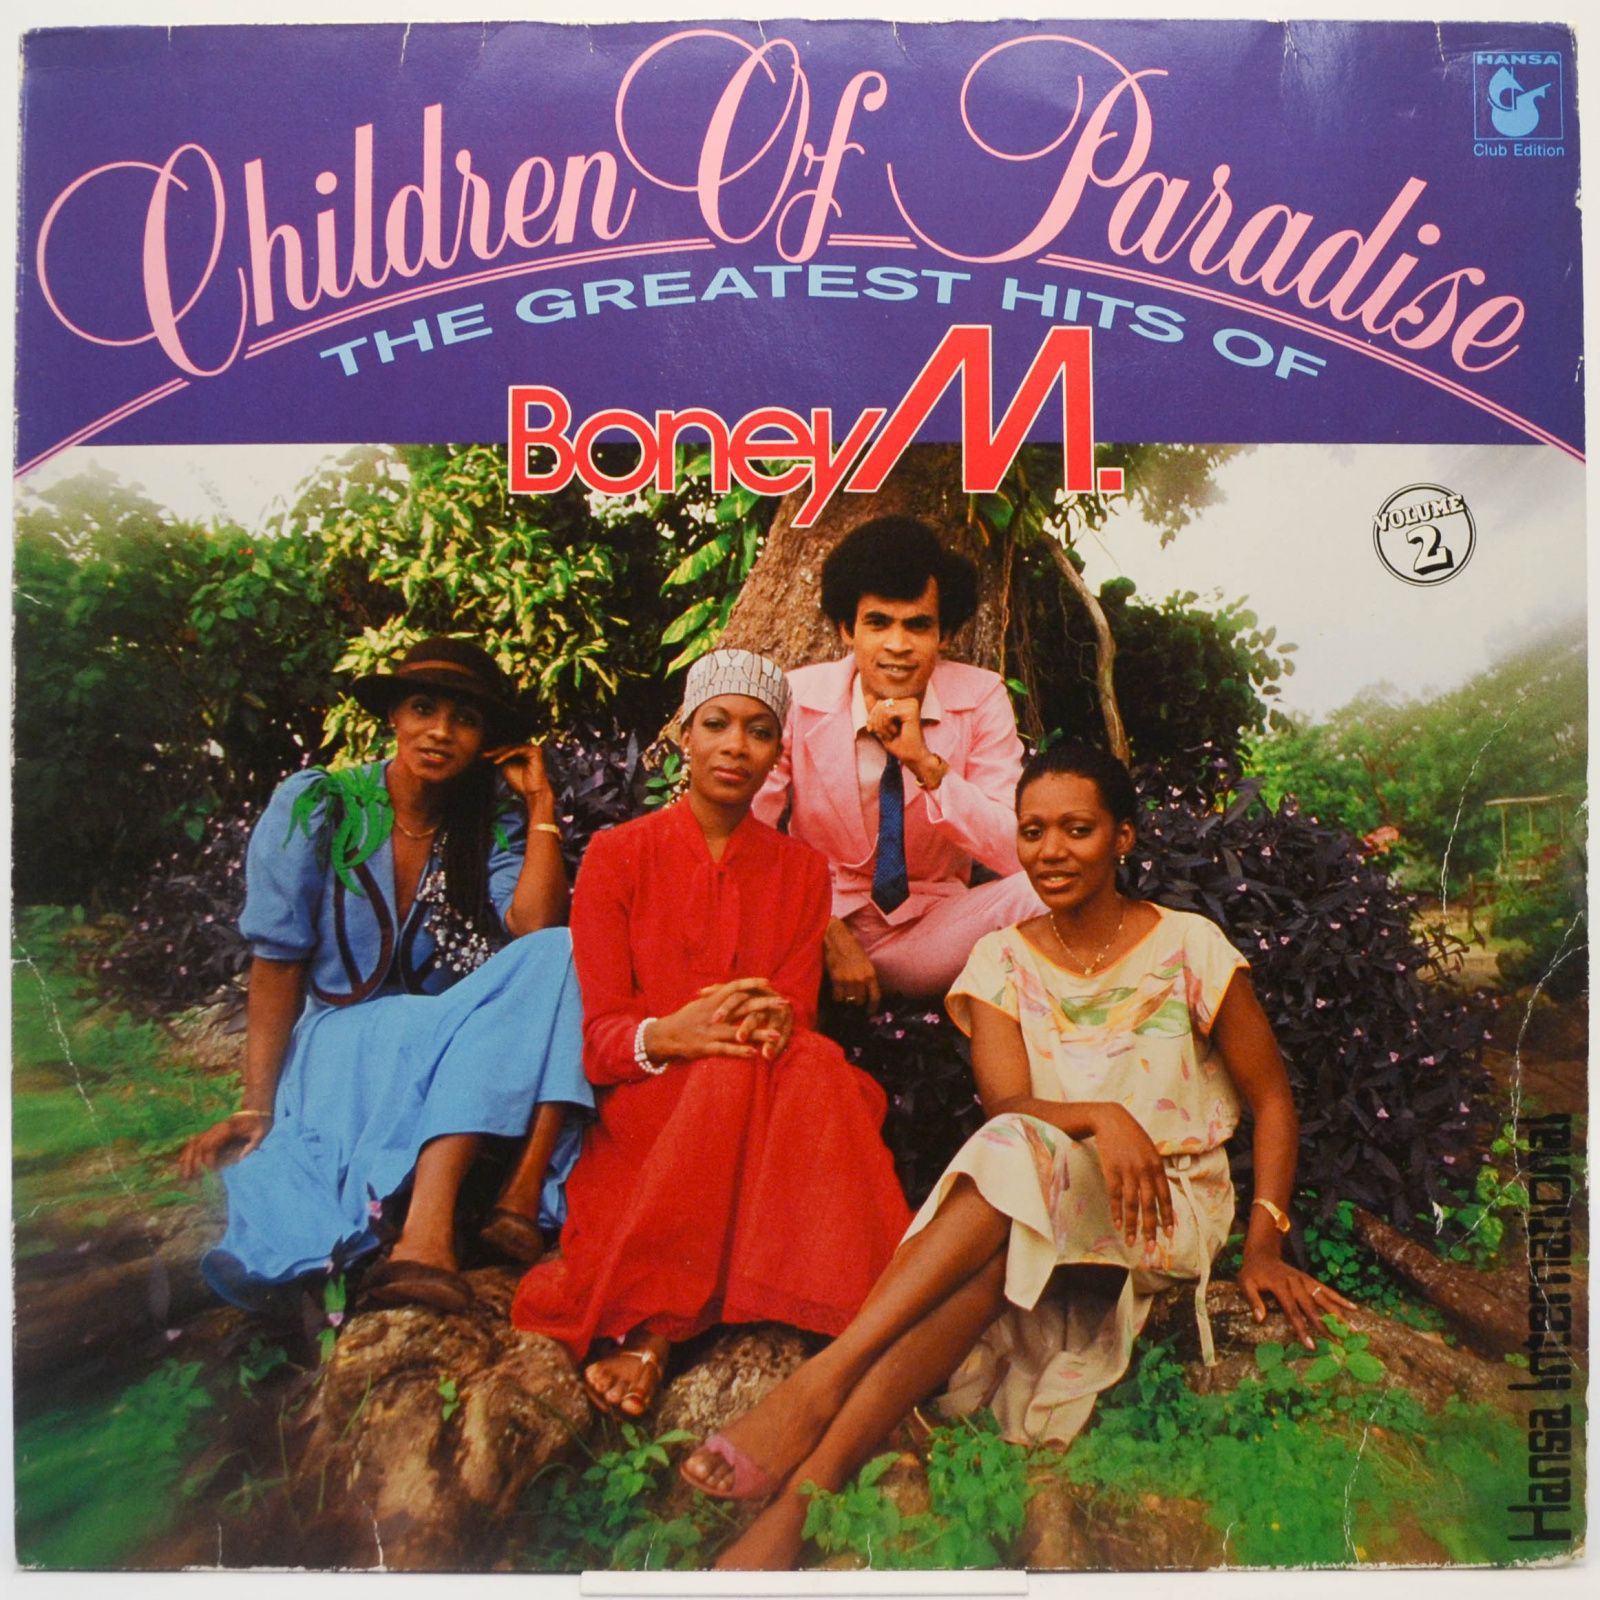 Children Of Paradise - The Greatest Hits Of - Volume 2, 1981